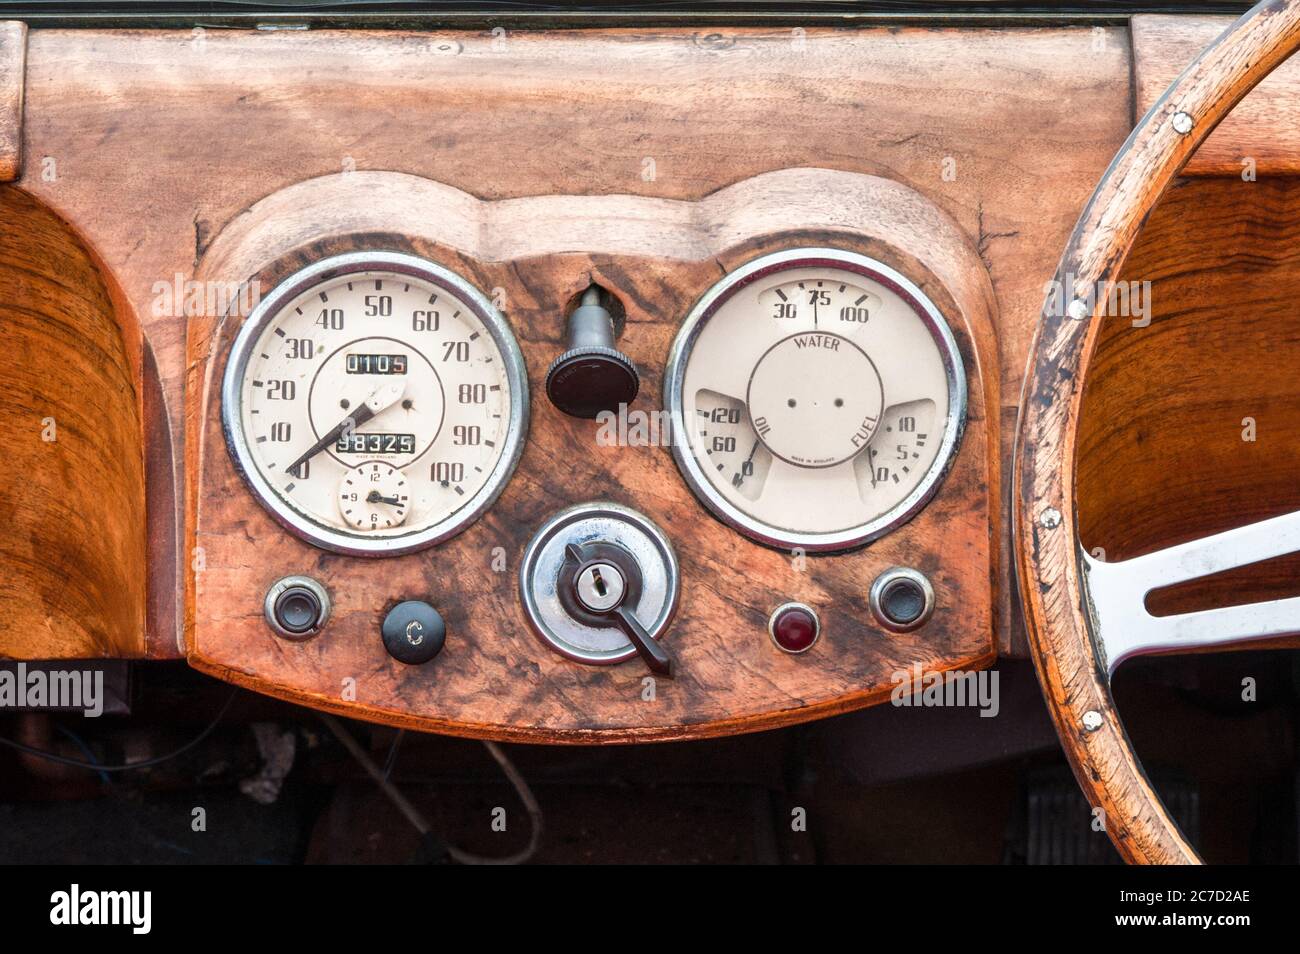 wooden steering wheel and dashboard interior of a vintage automobile Stock Photo